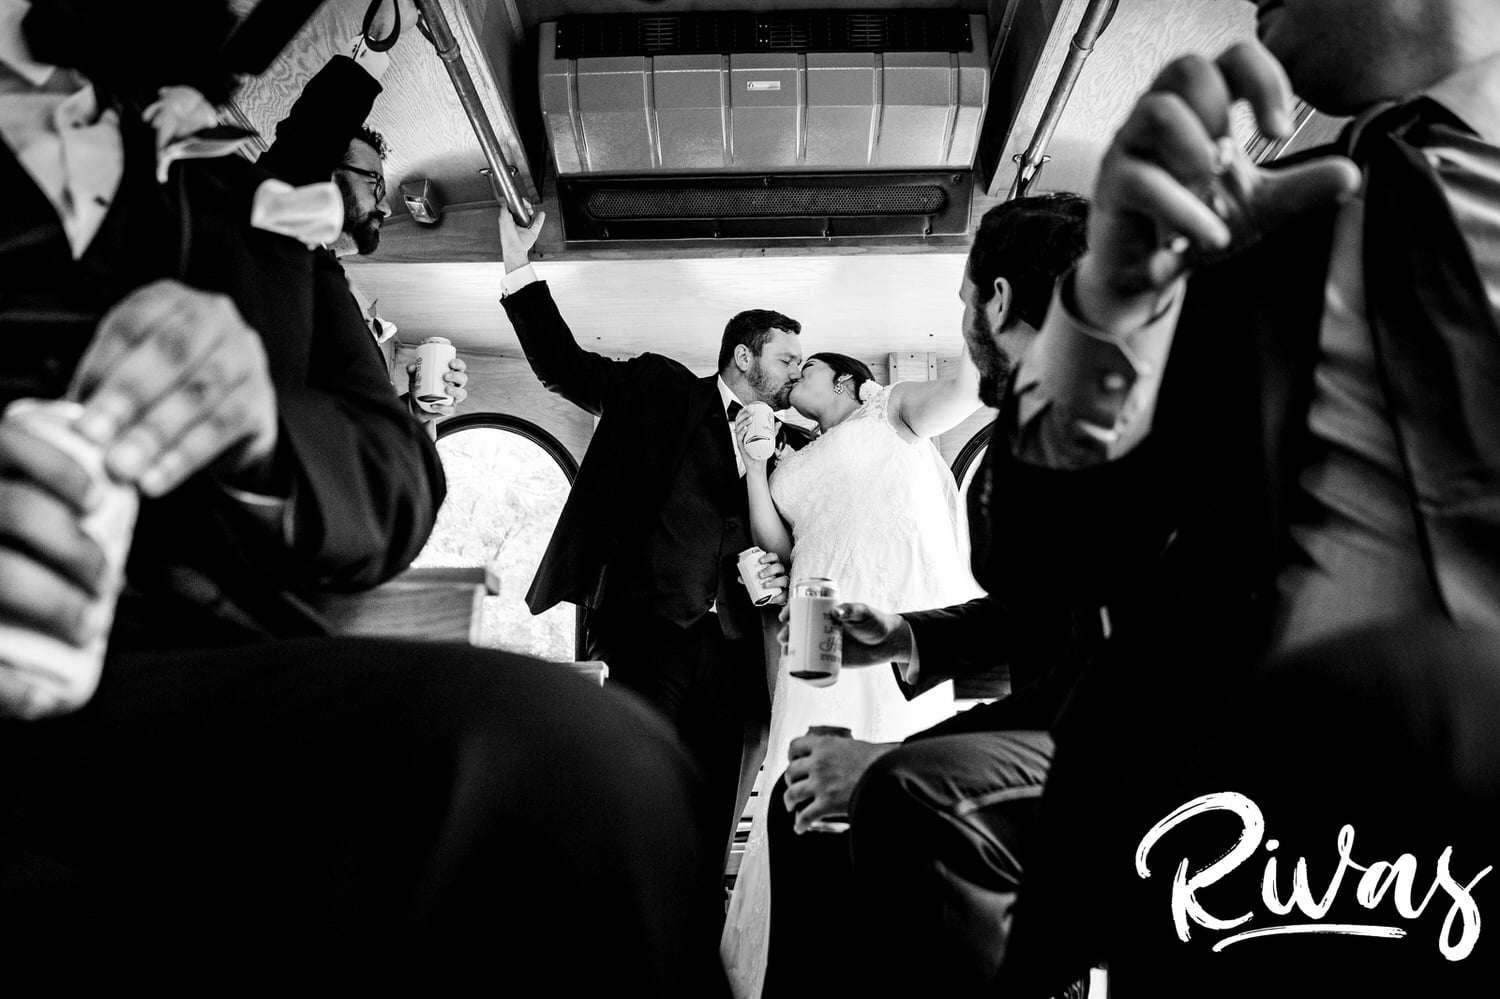 A candid black and white picture taken through the legs and arms of trolley riders of a bride and groom sharing a kiss on their summer wedding day in Lawrence, Kansas. 